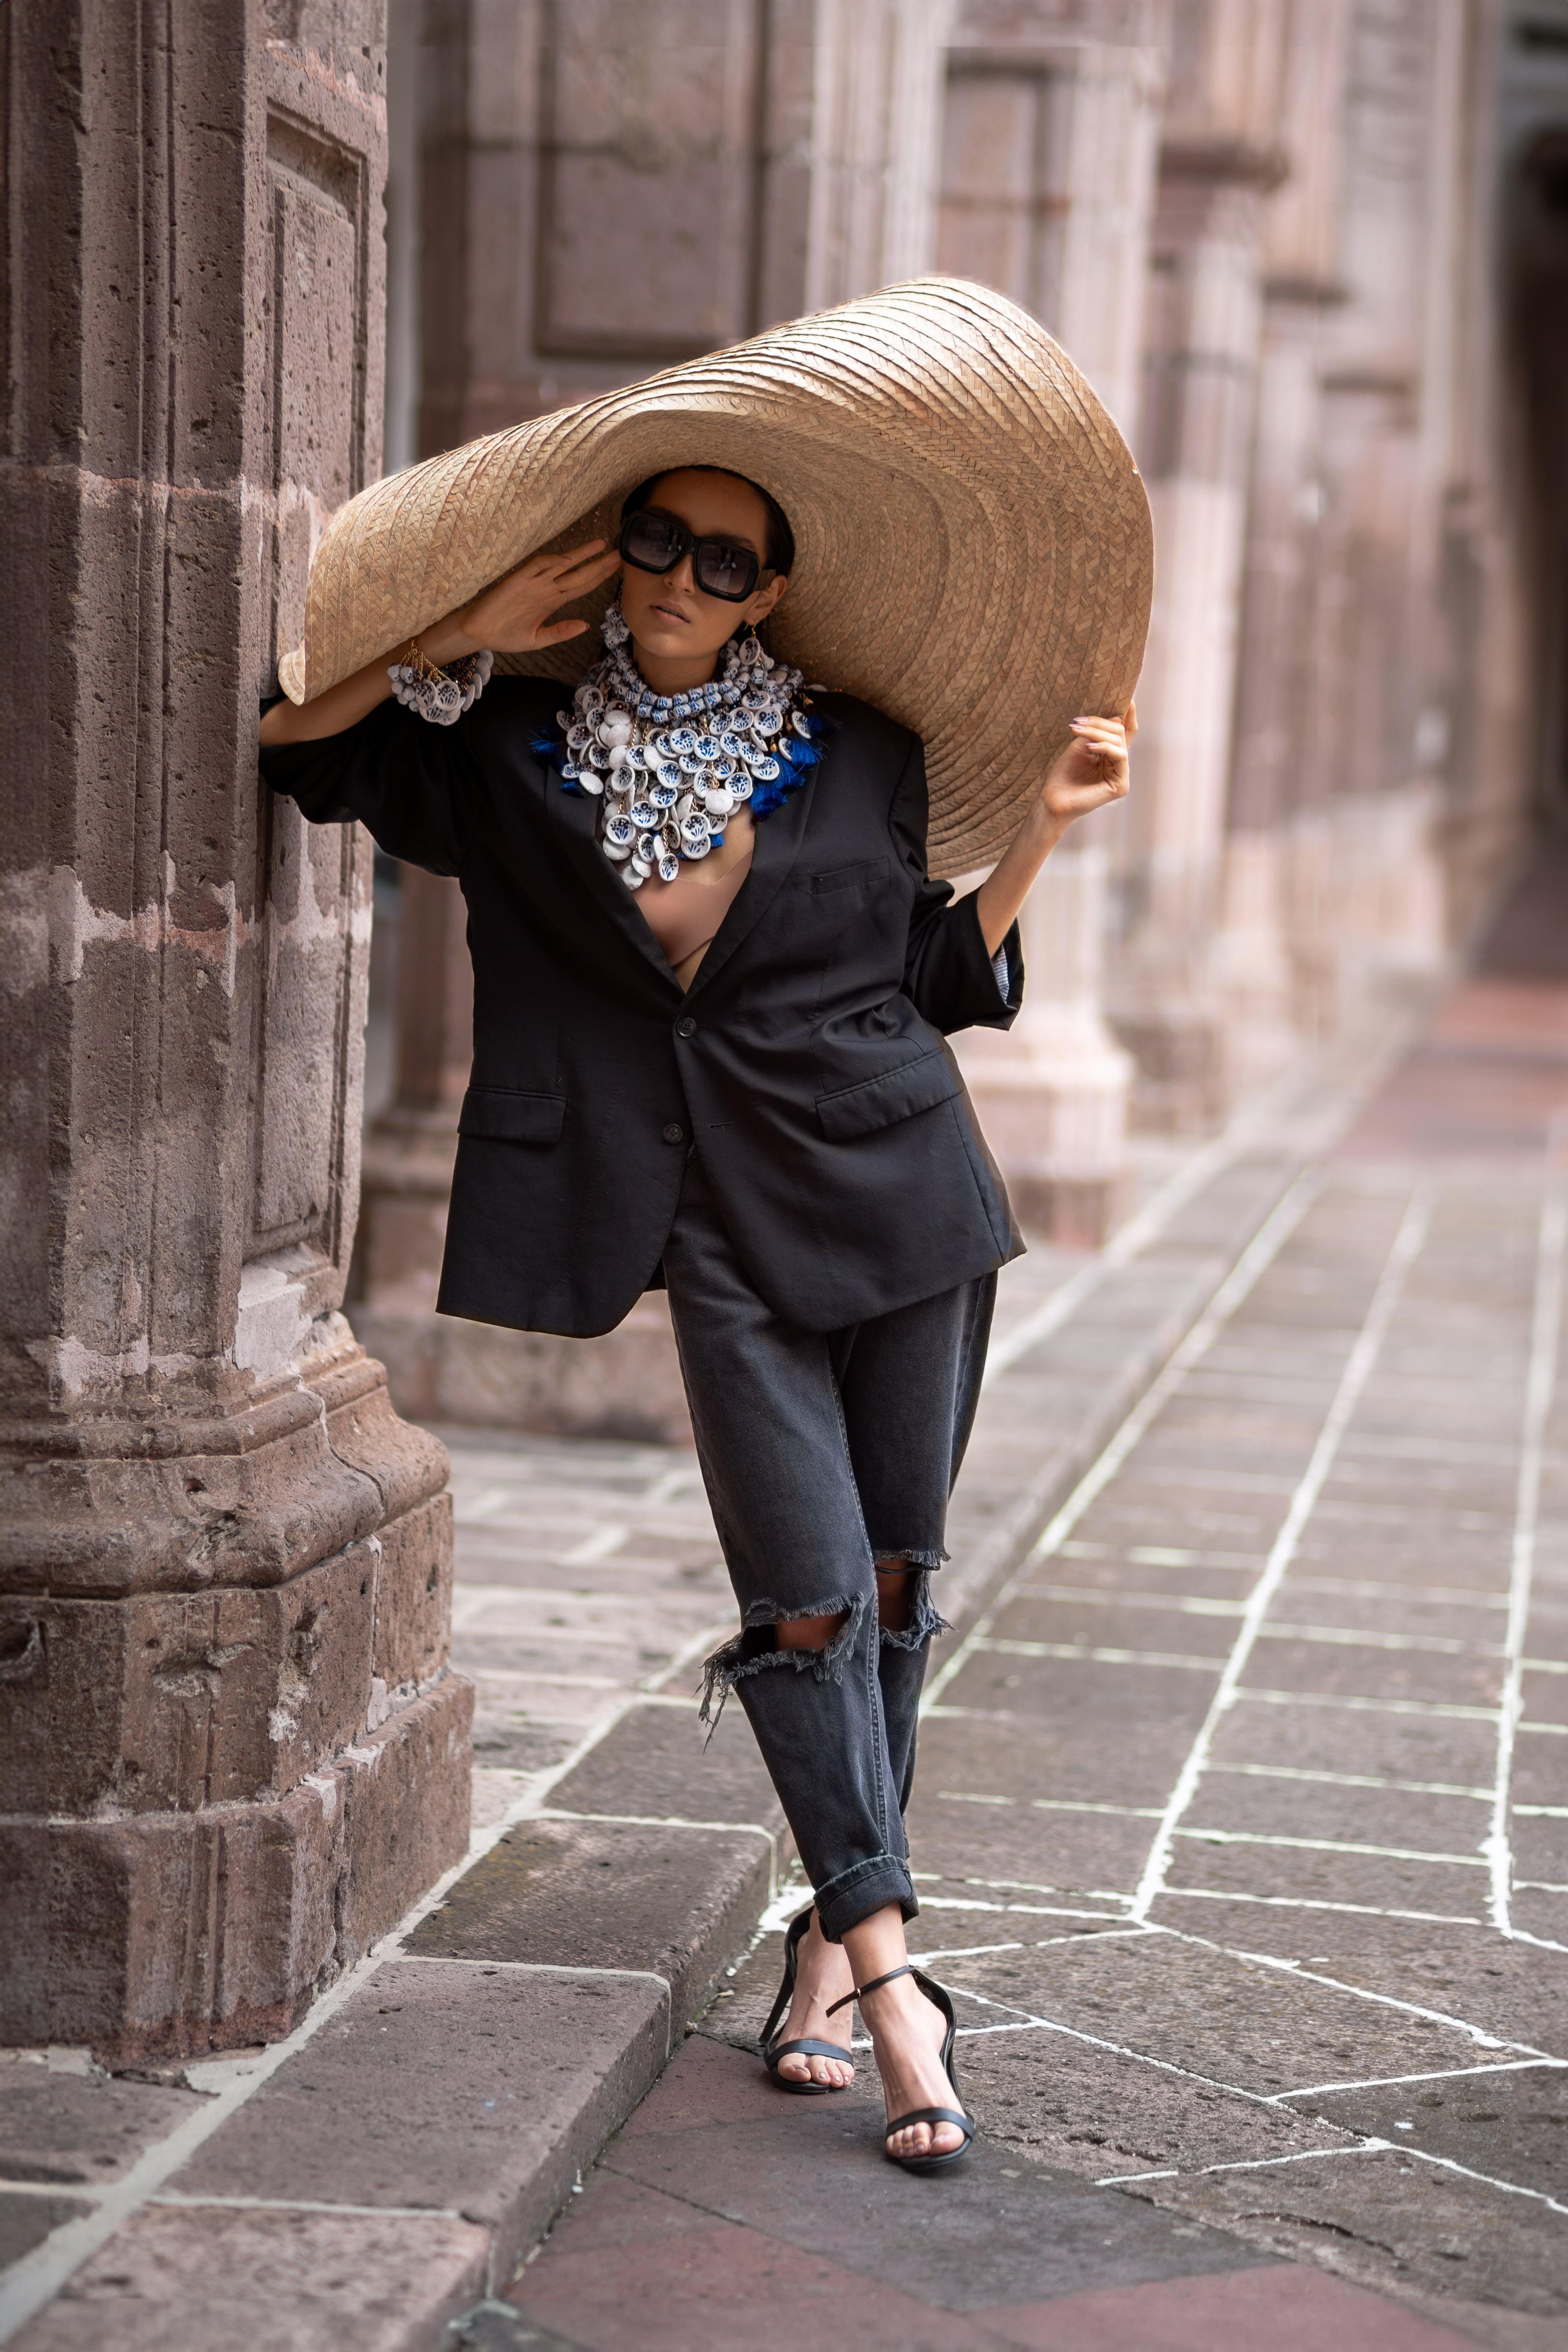 A woman in a big hat and sunglasses. | Source: Pexels